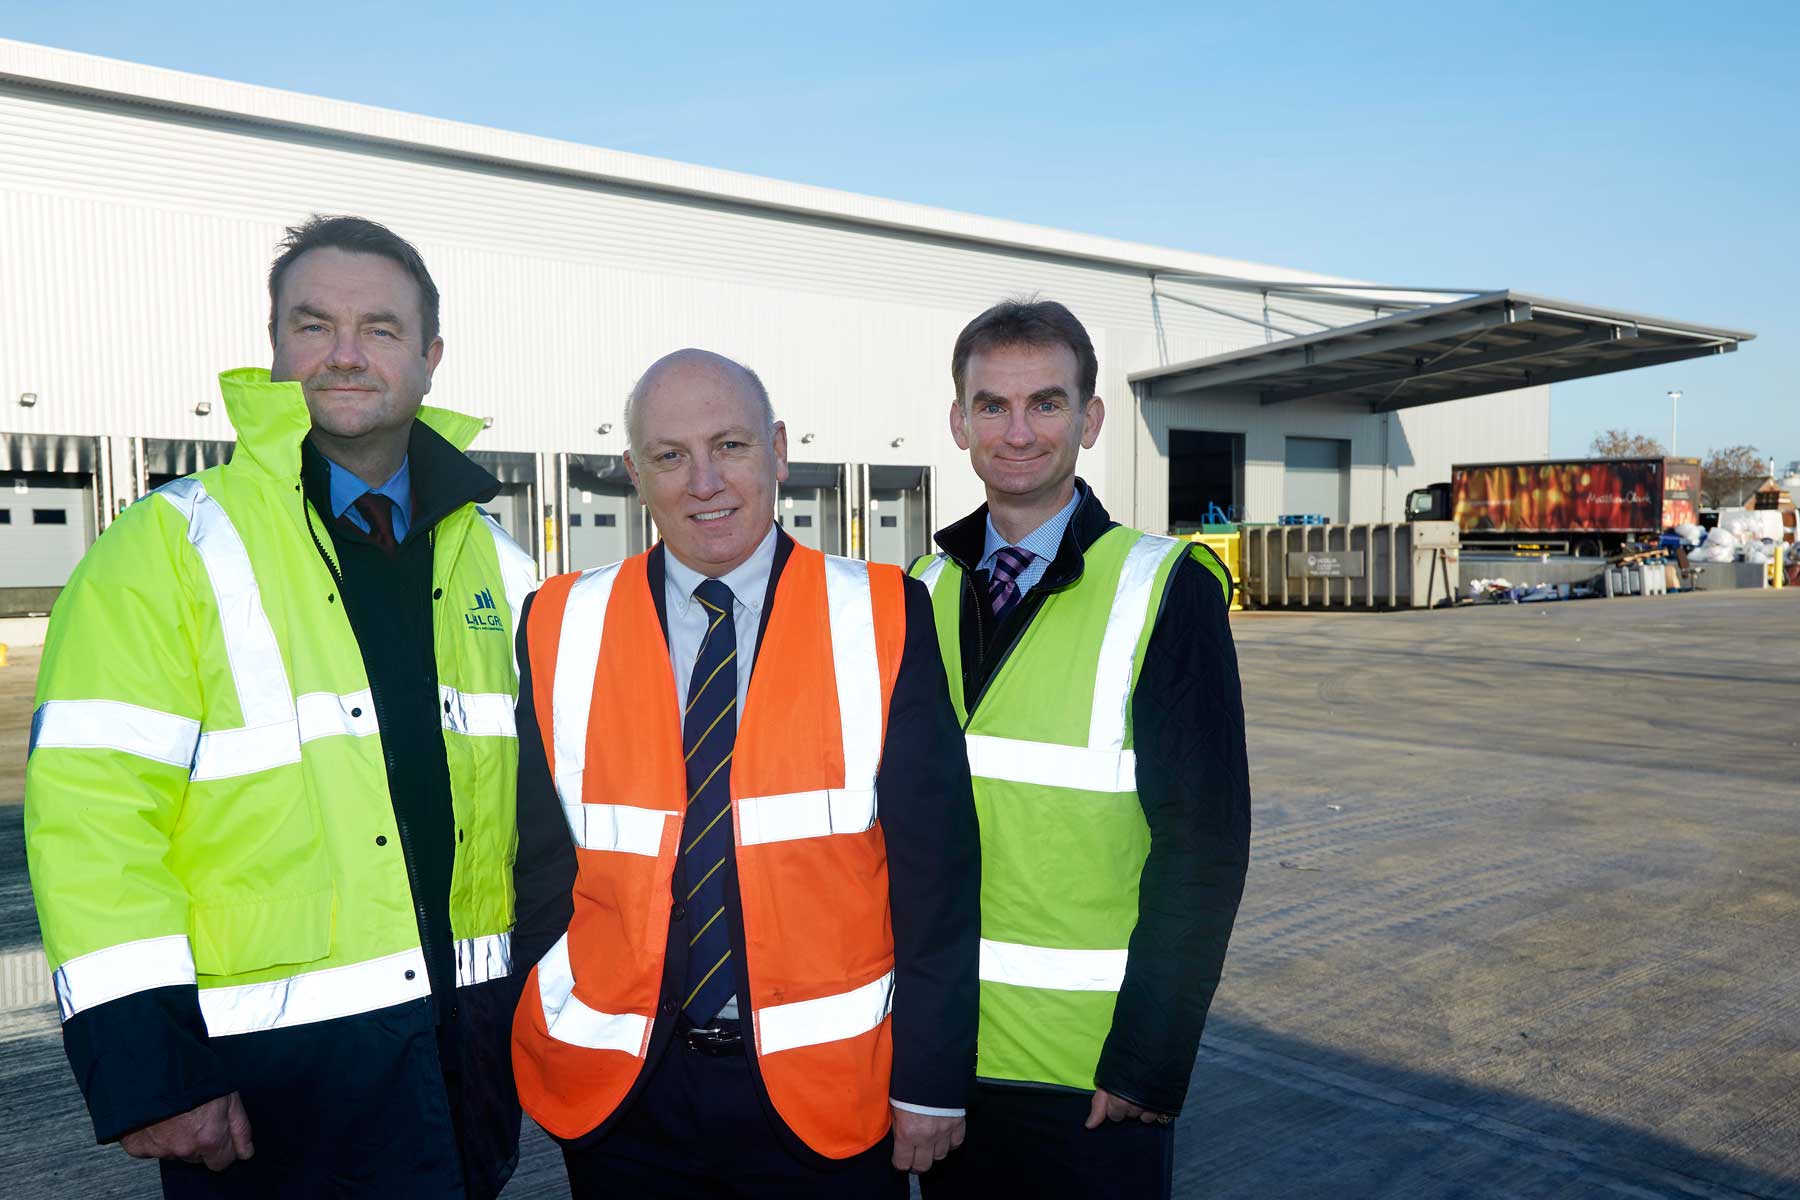 Pictured (L to R) outside the new Matthew Clark Wholesale Ltd purpose-built distribution hub at Thorp Arch Estate, Wetherby, which represents one of Yorkshire’s biggest commercial property deals in the last 18 months are: director of property and construction and consultants, LHL Group, York, Richard Hampshire; Matthew Clark Wholesale Ltd regional managing director, Ian Gordon and director of Wharfedale Property Management, Tim Munns